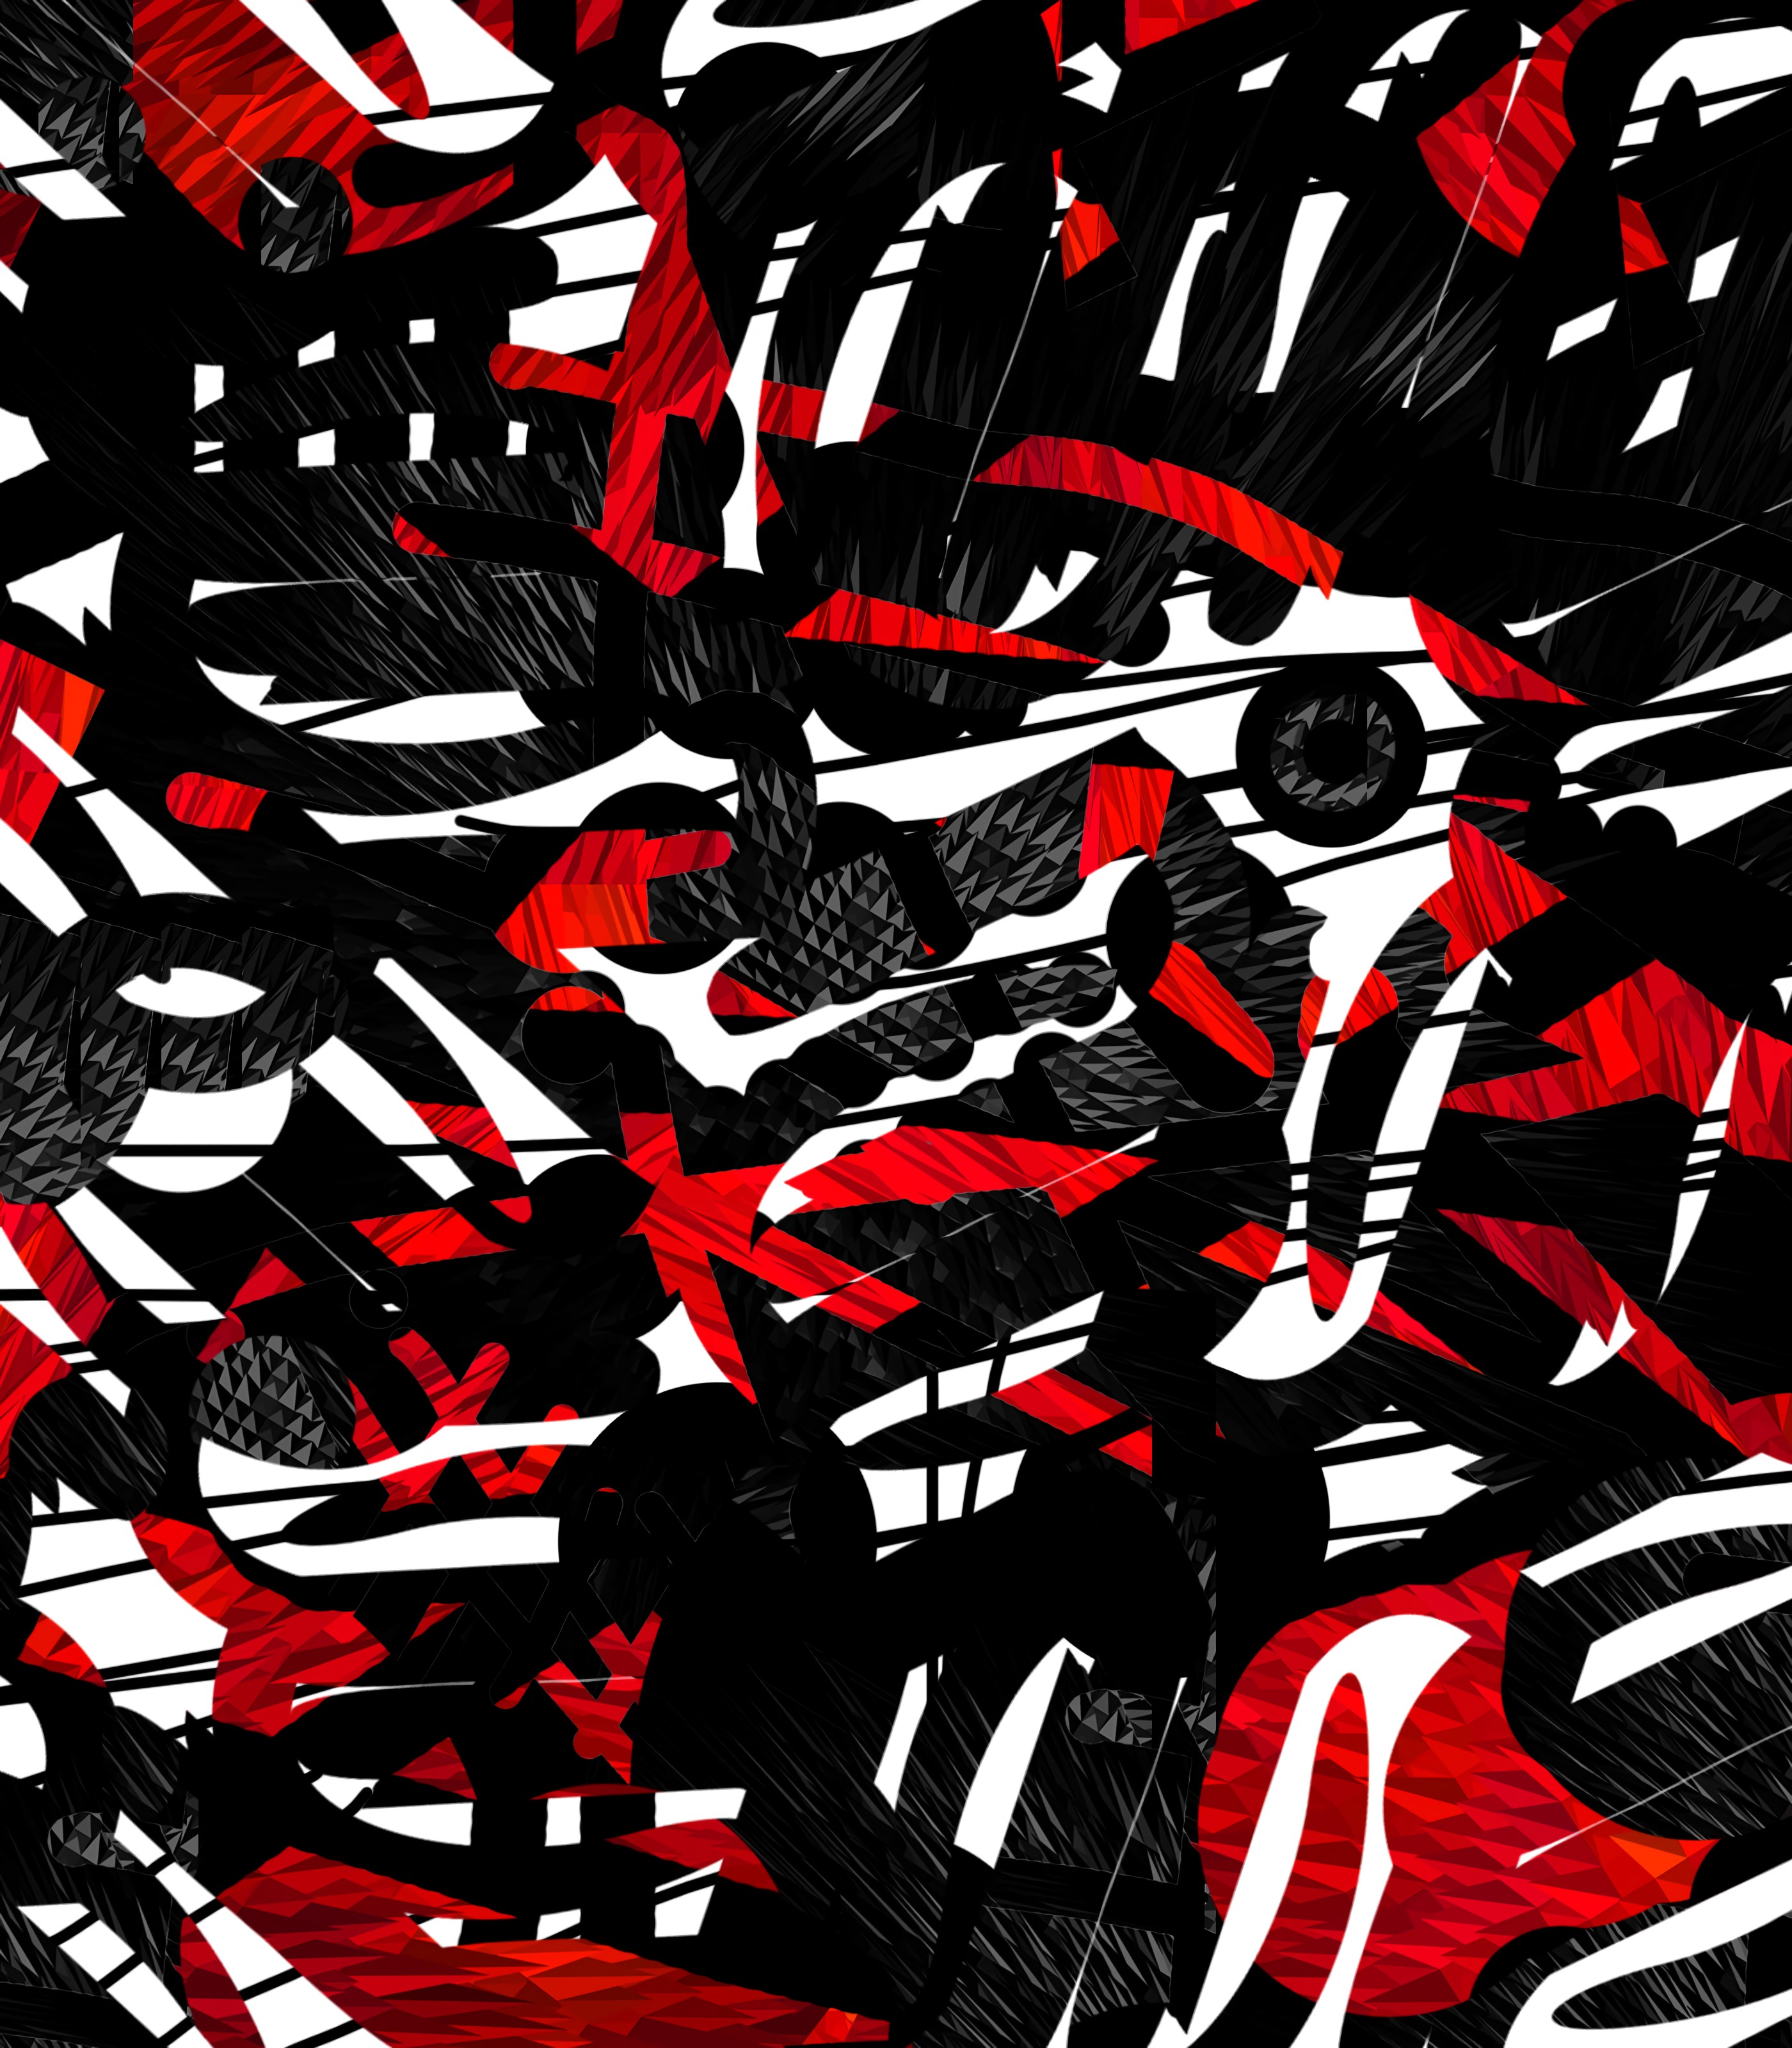 119772 free wallpaper 240x320 for phone, download images red, black, lines, abstract 240x320 for mobile